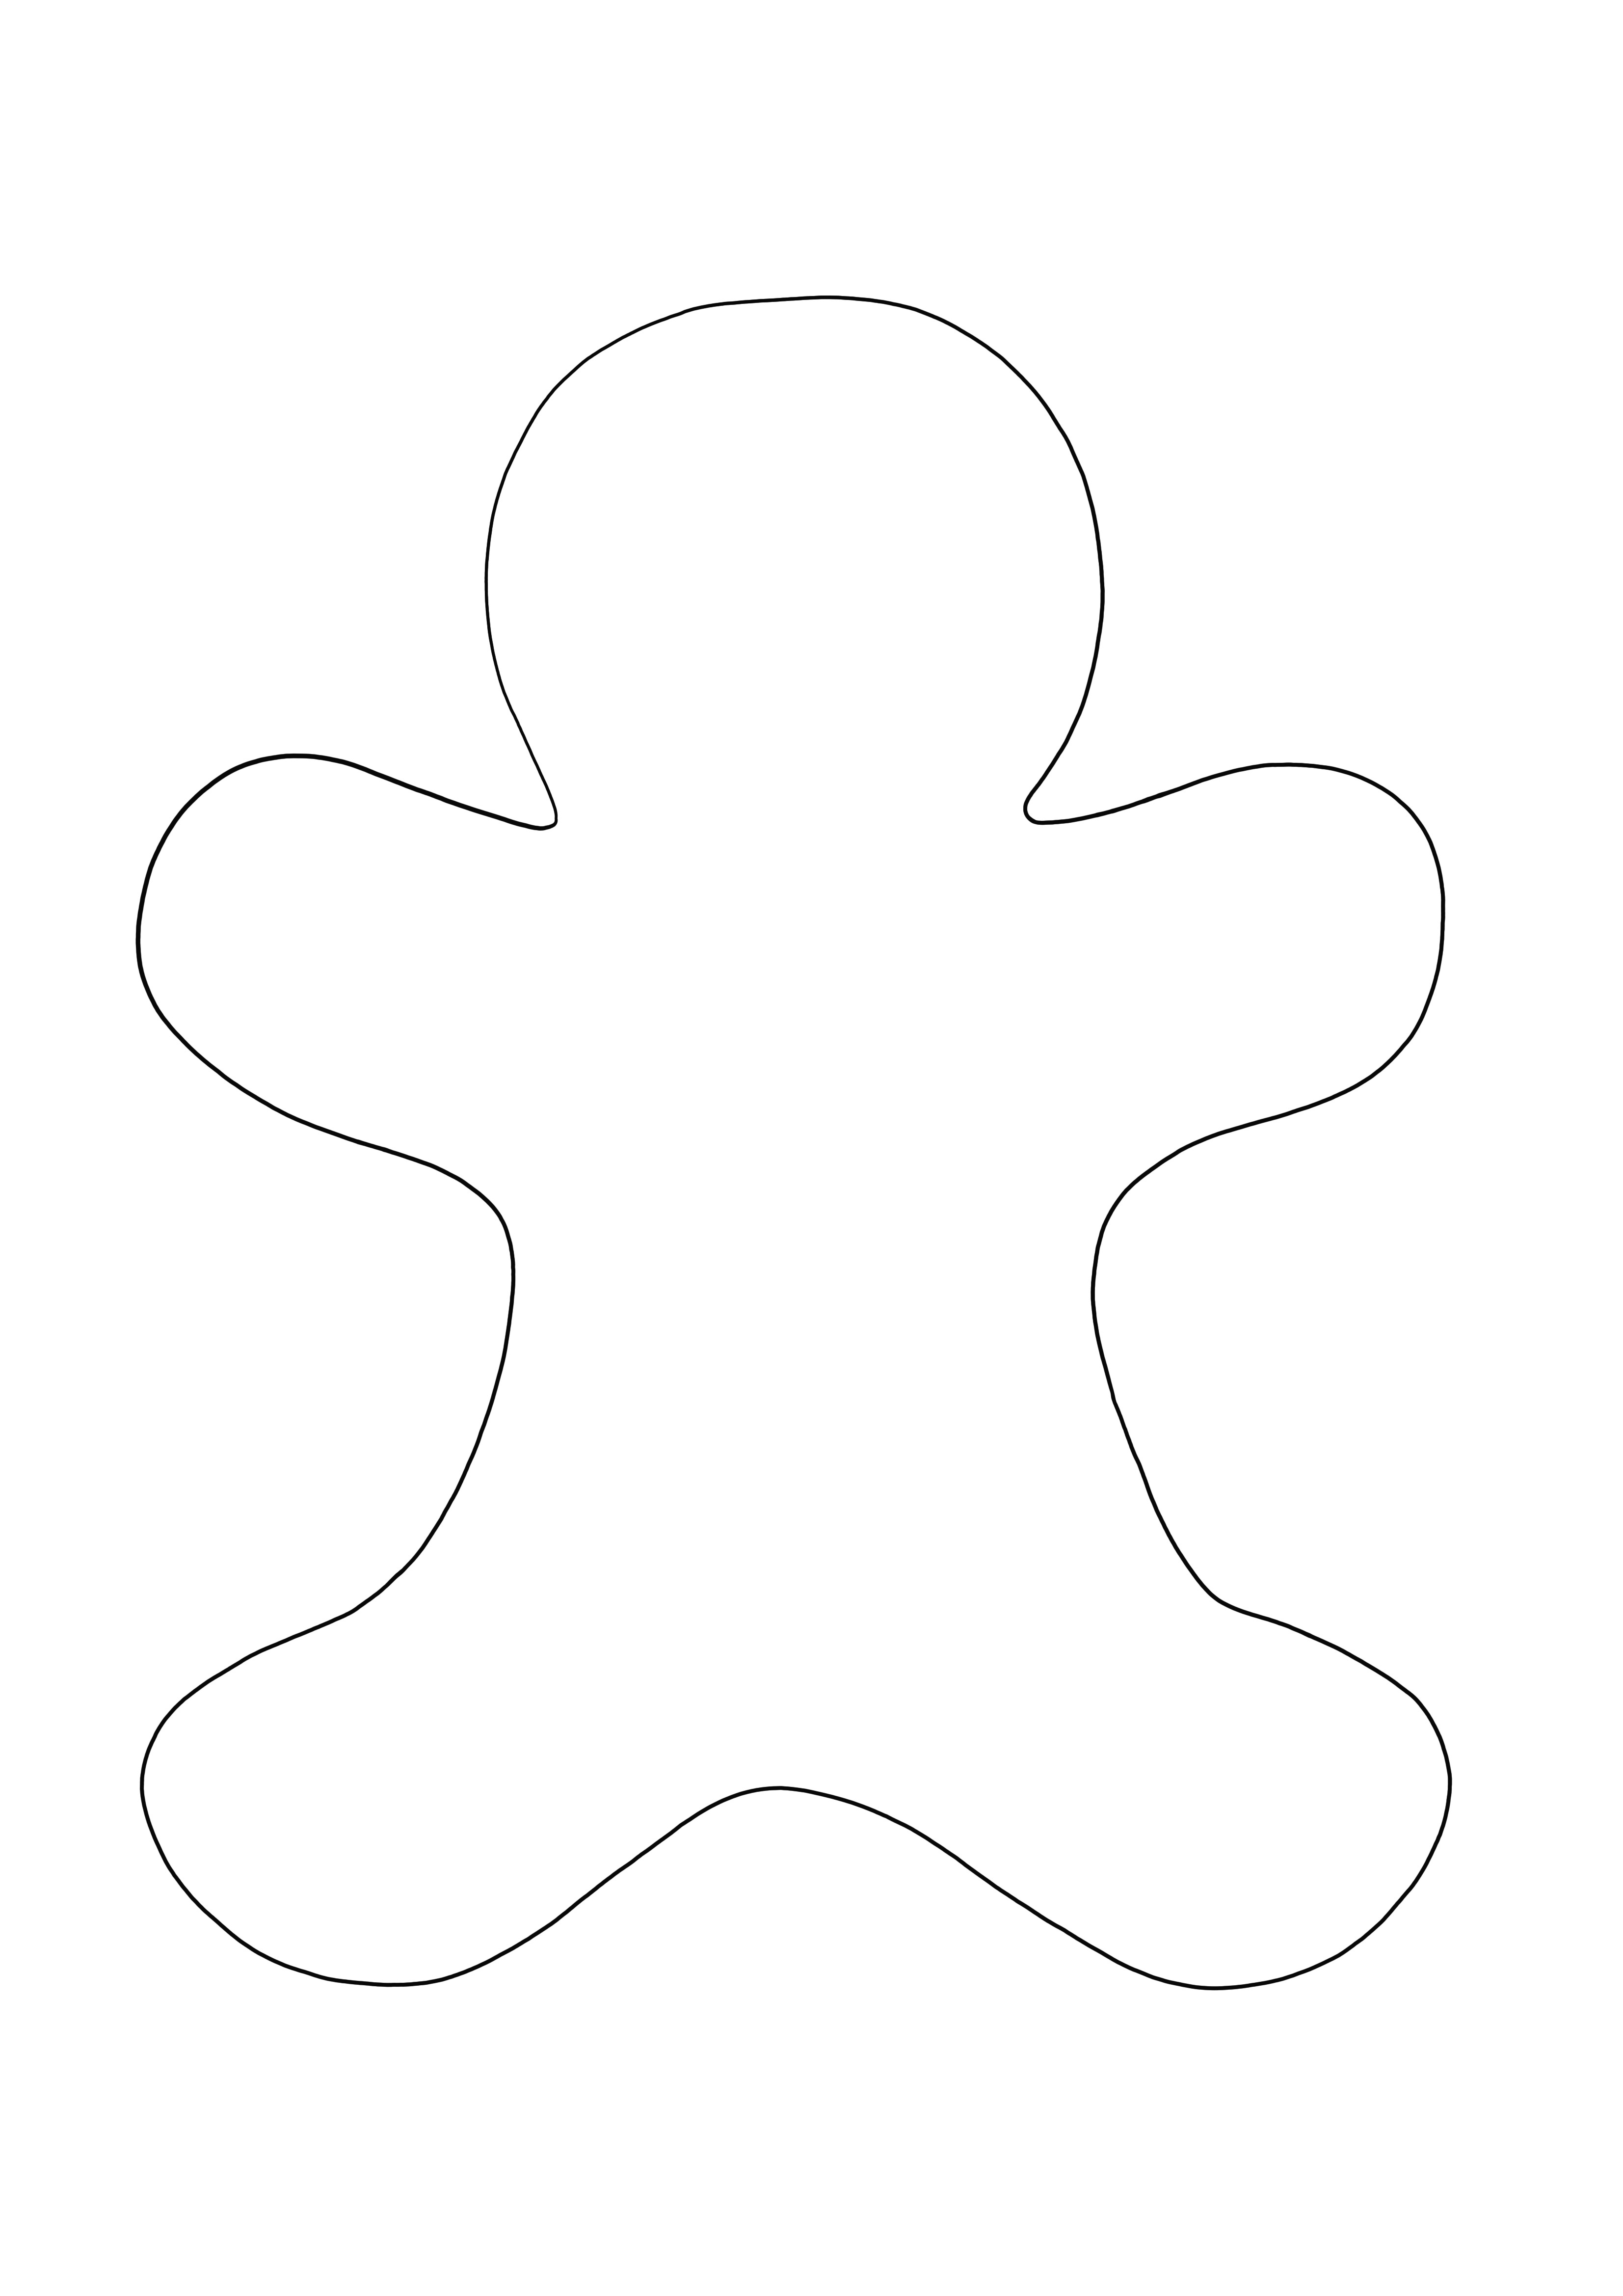 Blank Gingerbread Man to print or download for free and simple to color sheet